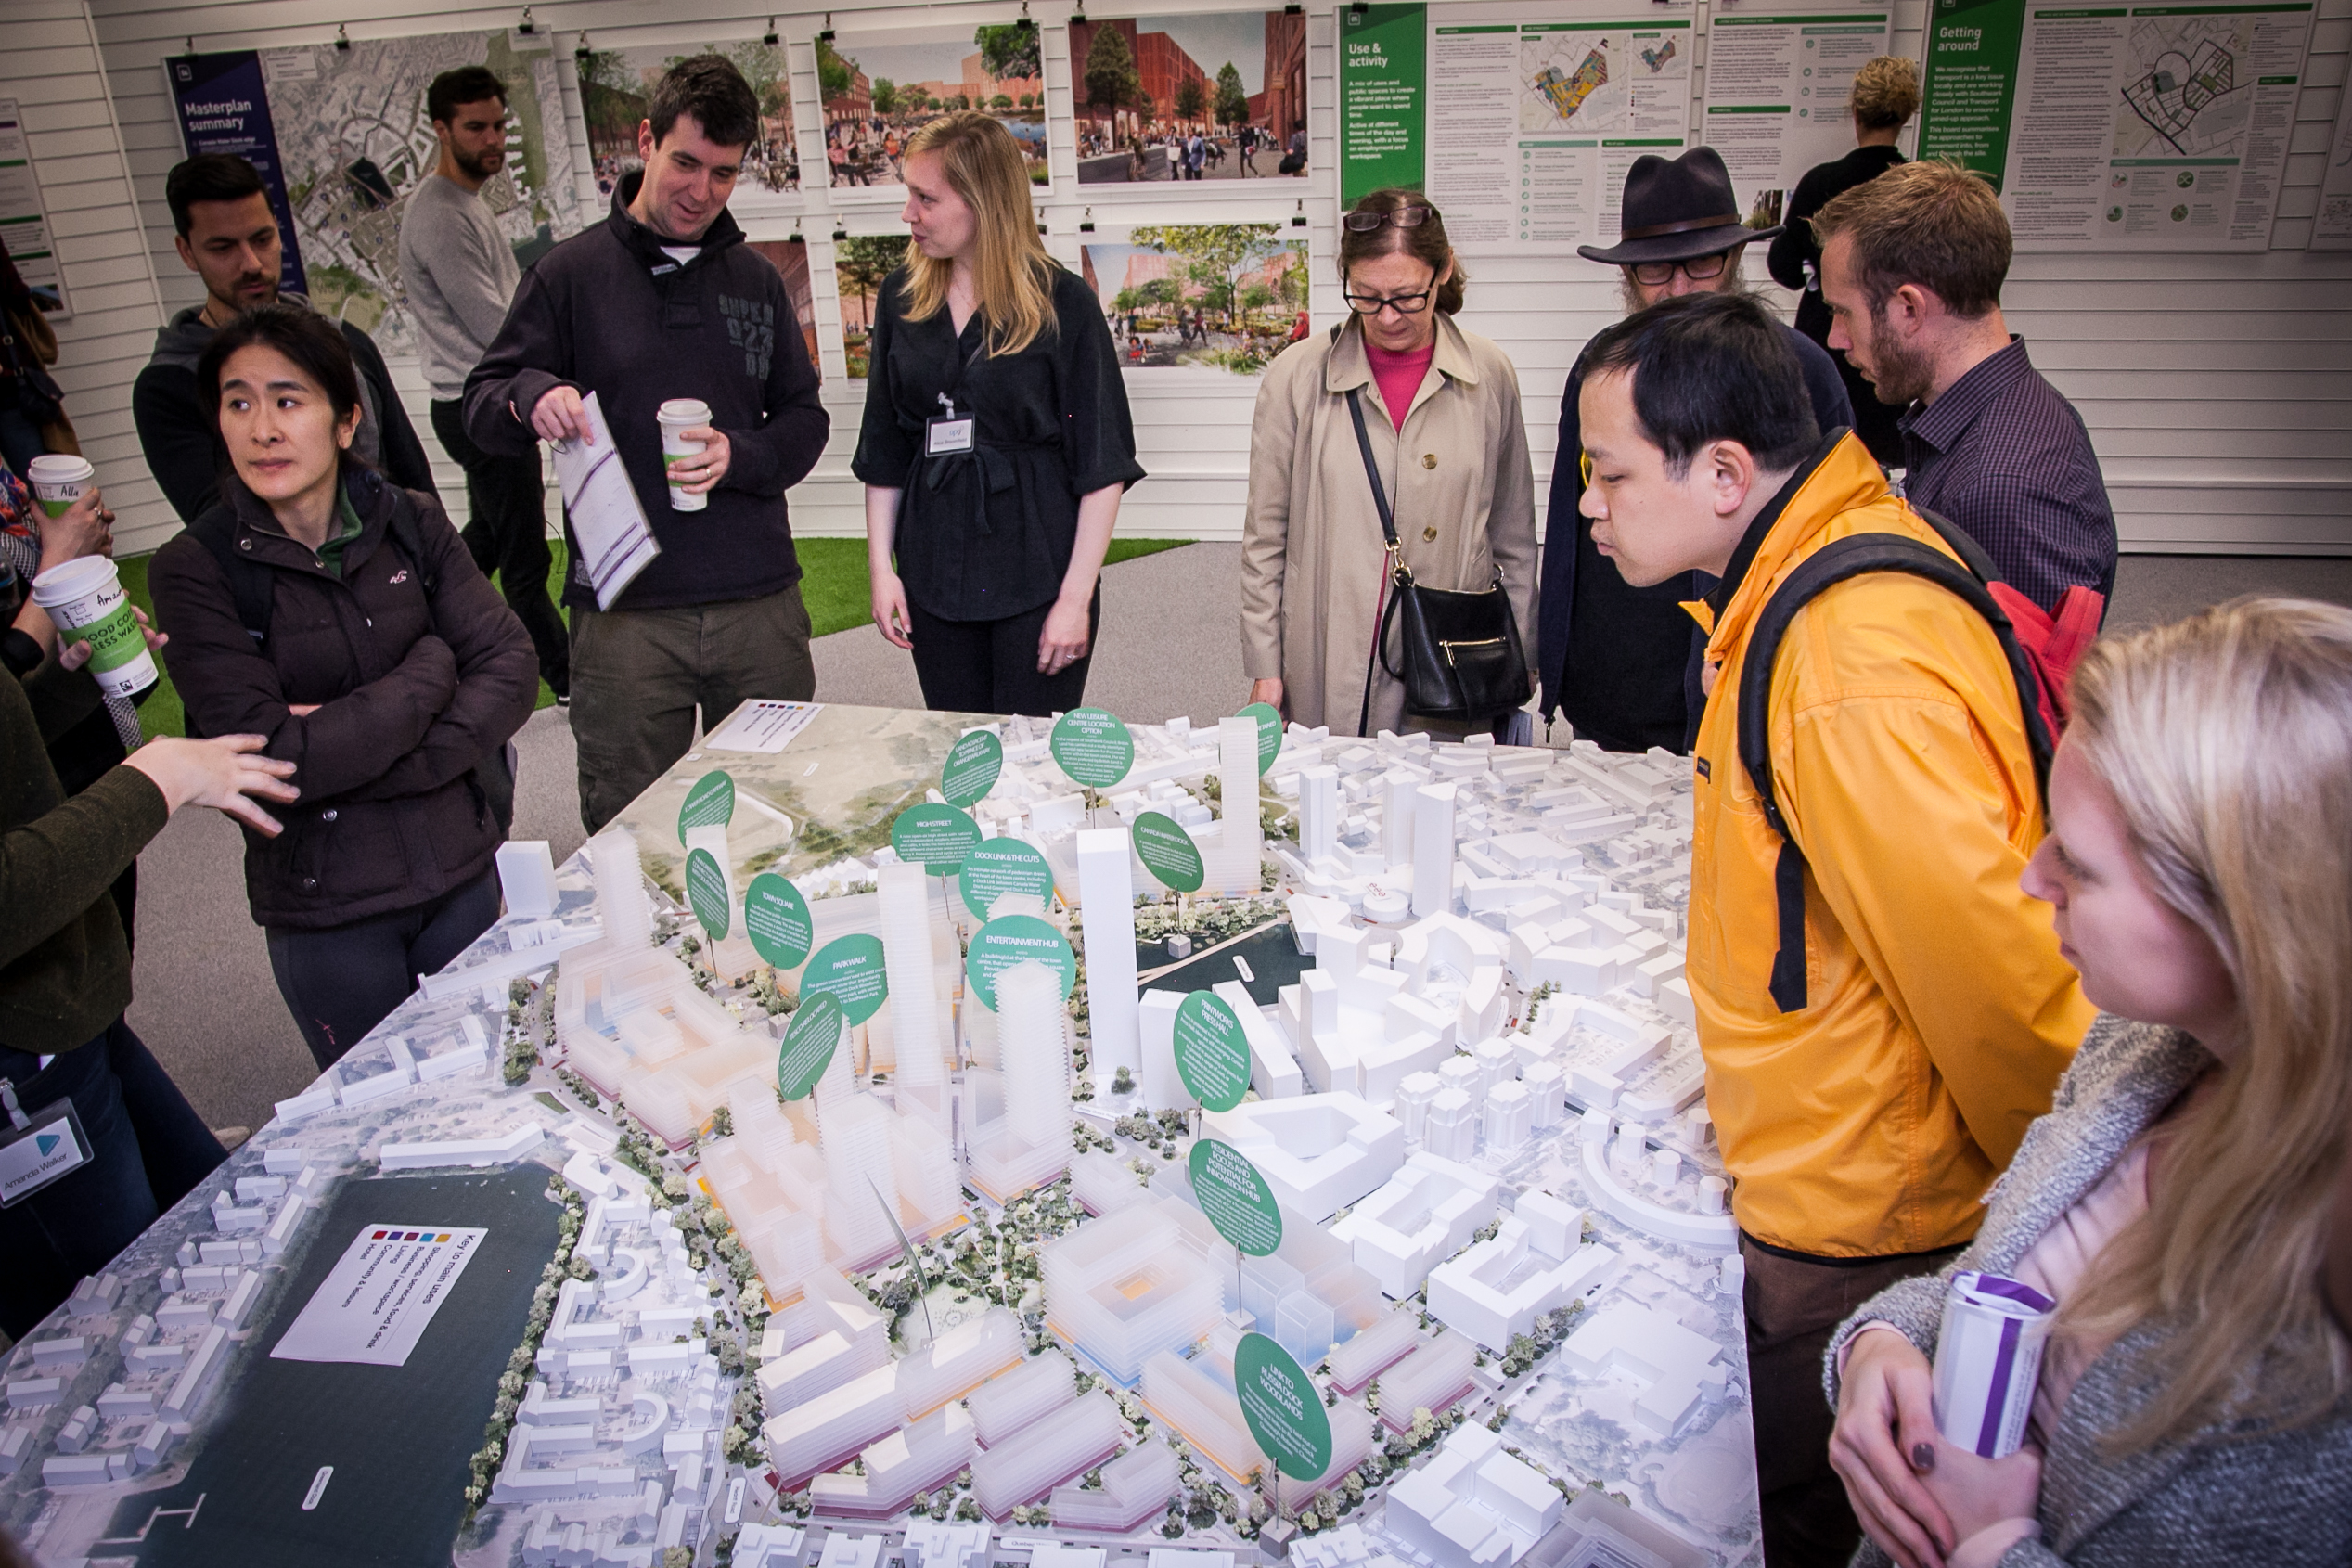 People inspecting a model of the proposed development at a community consultation exercise